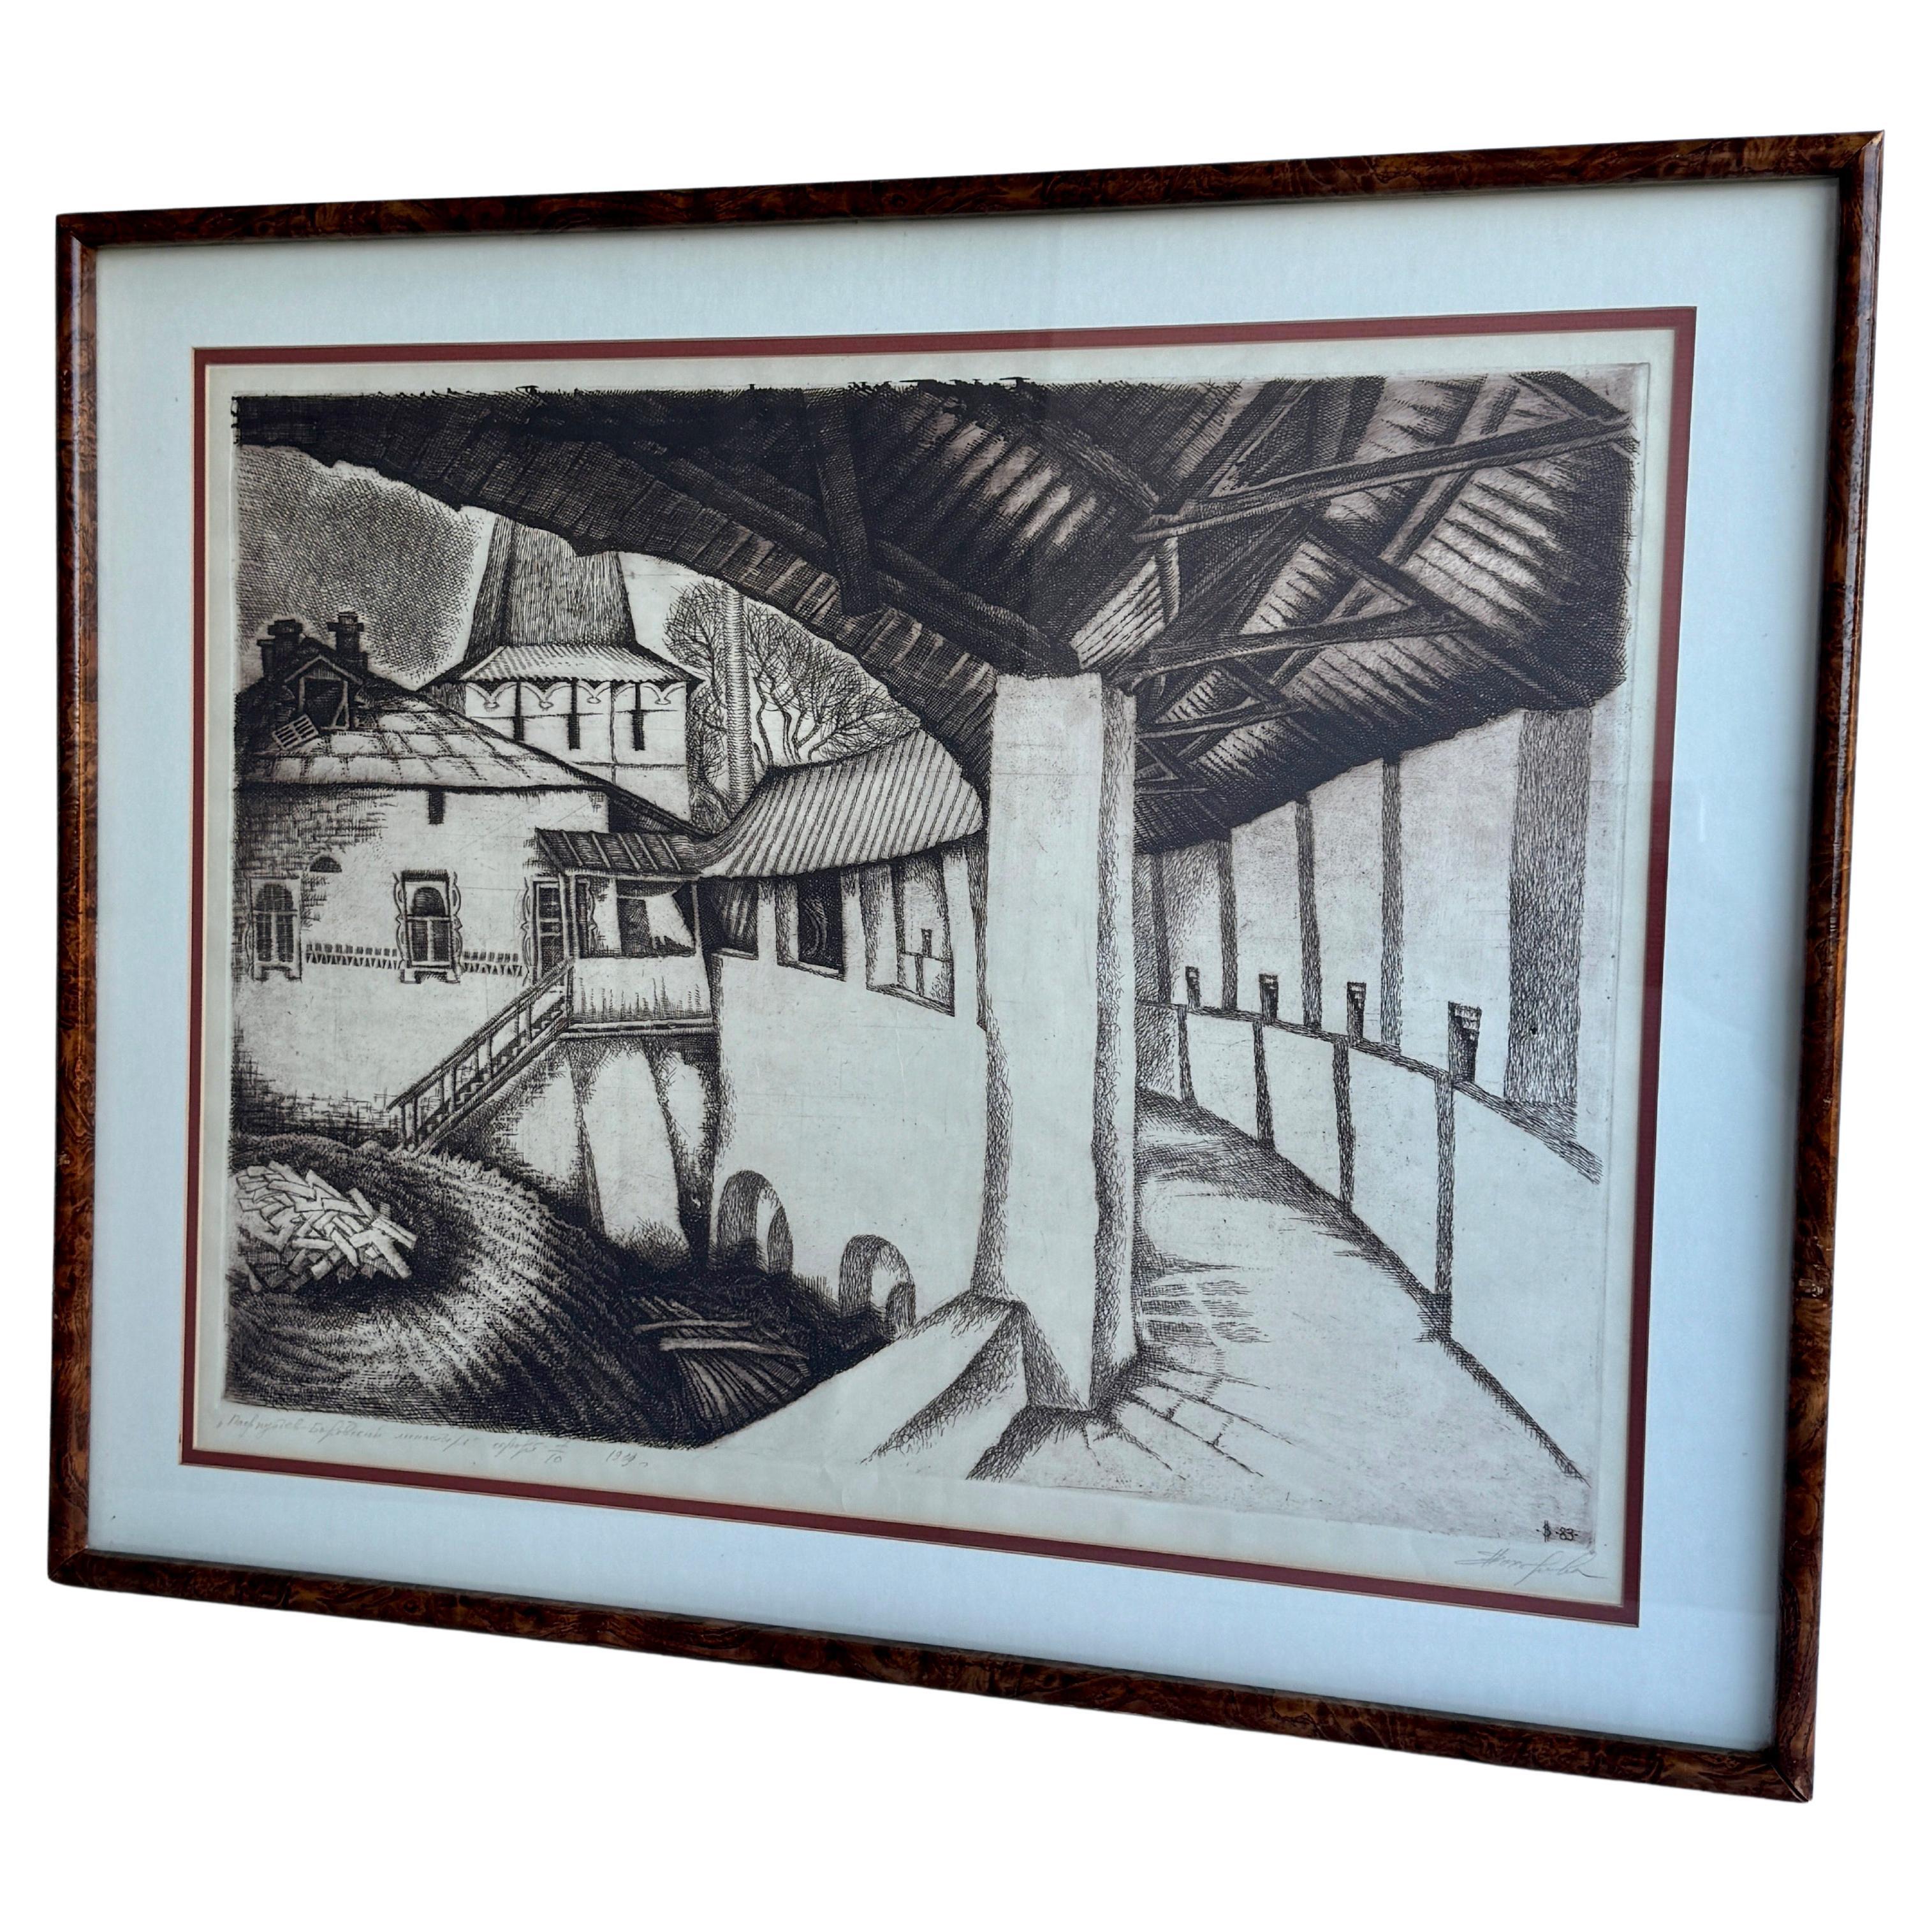 Faux bois frame with a 7/10 copper etched print of a Spanish courtyard.